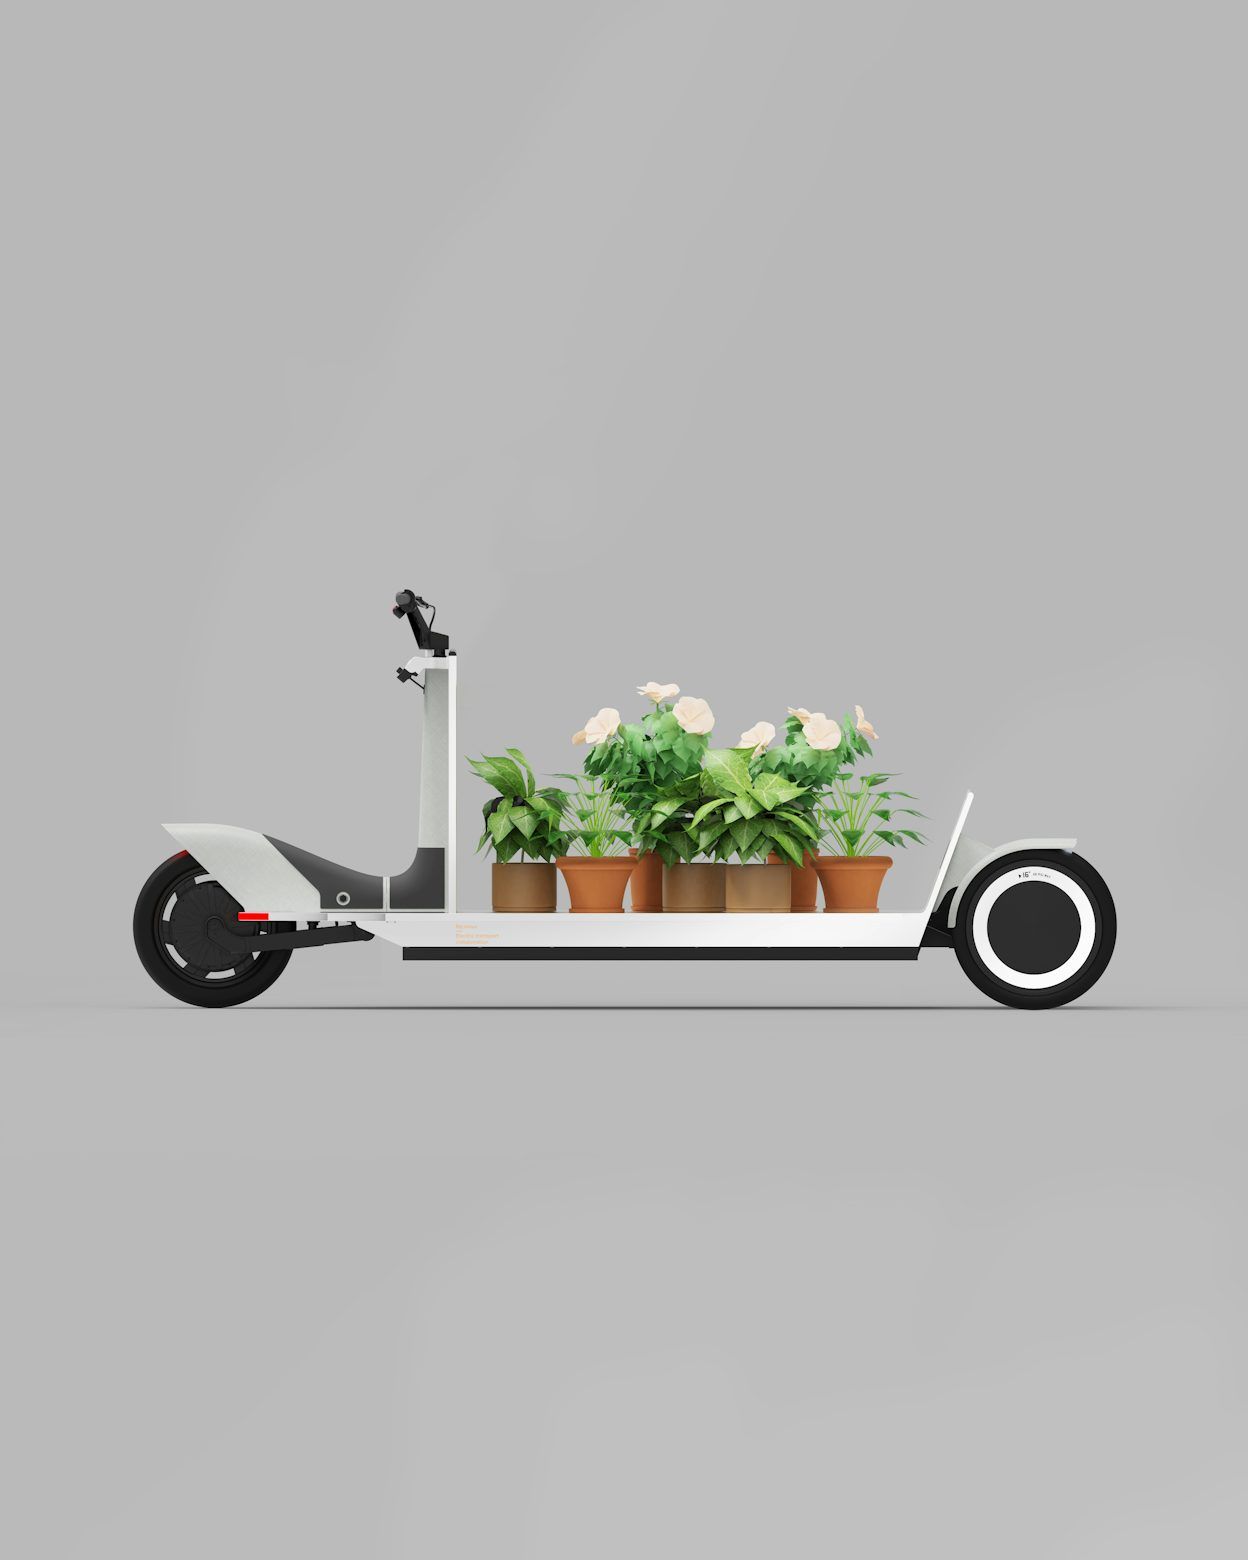 Flower pots placed on an elongated white electric bike with black wheels.